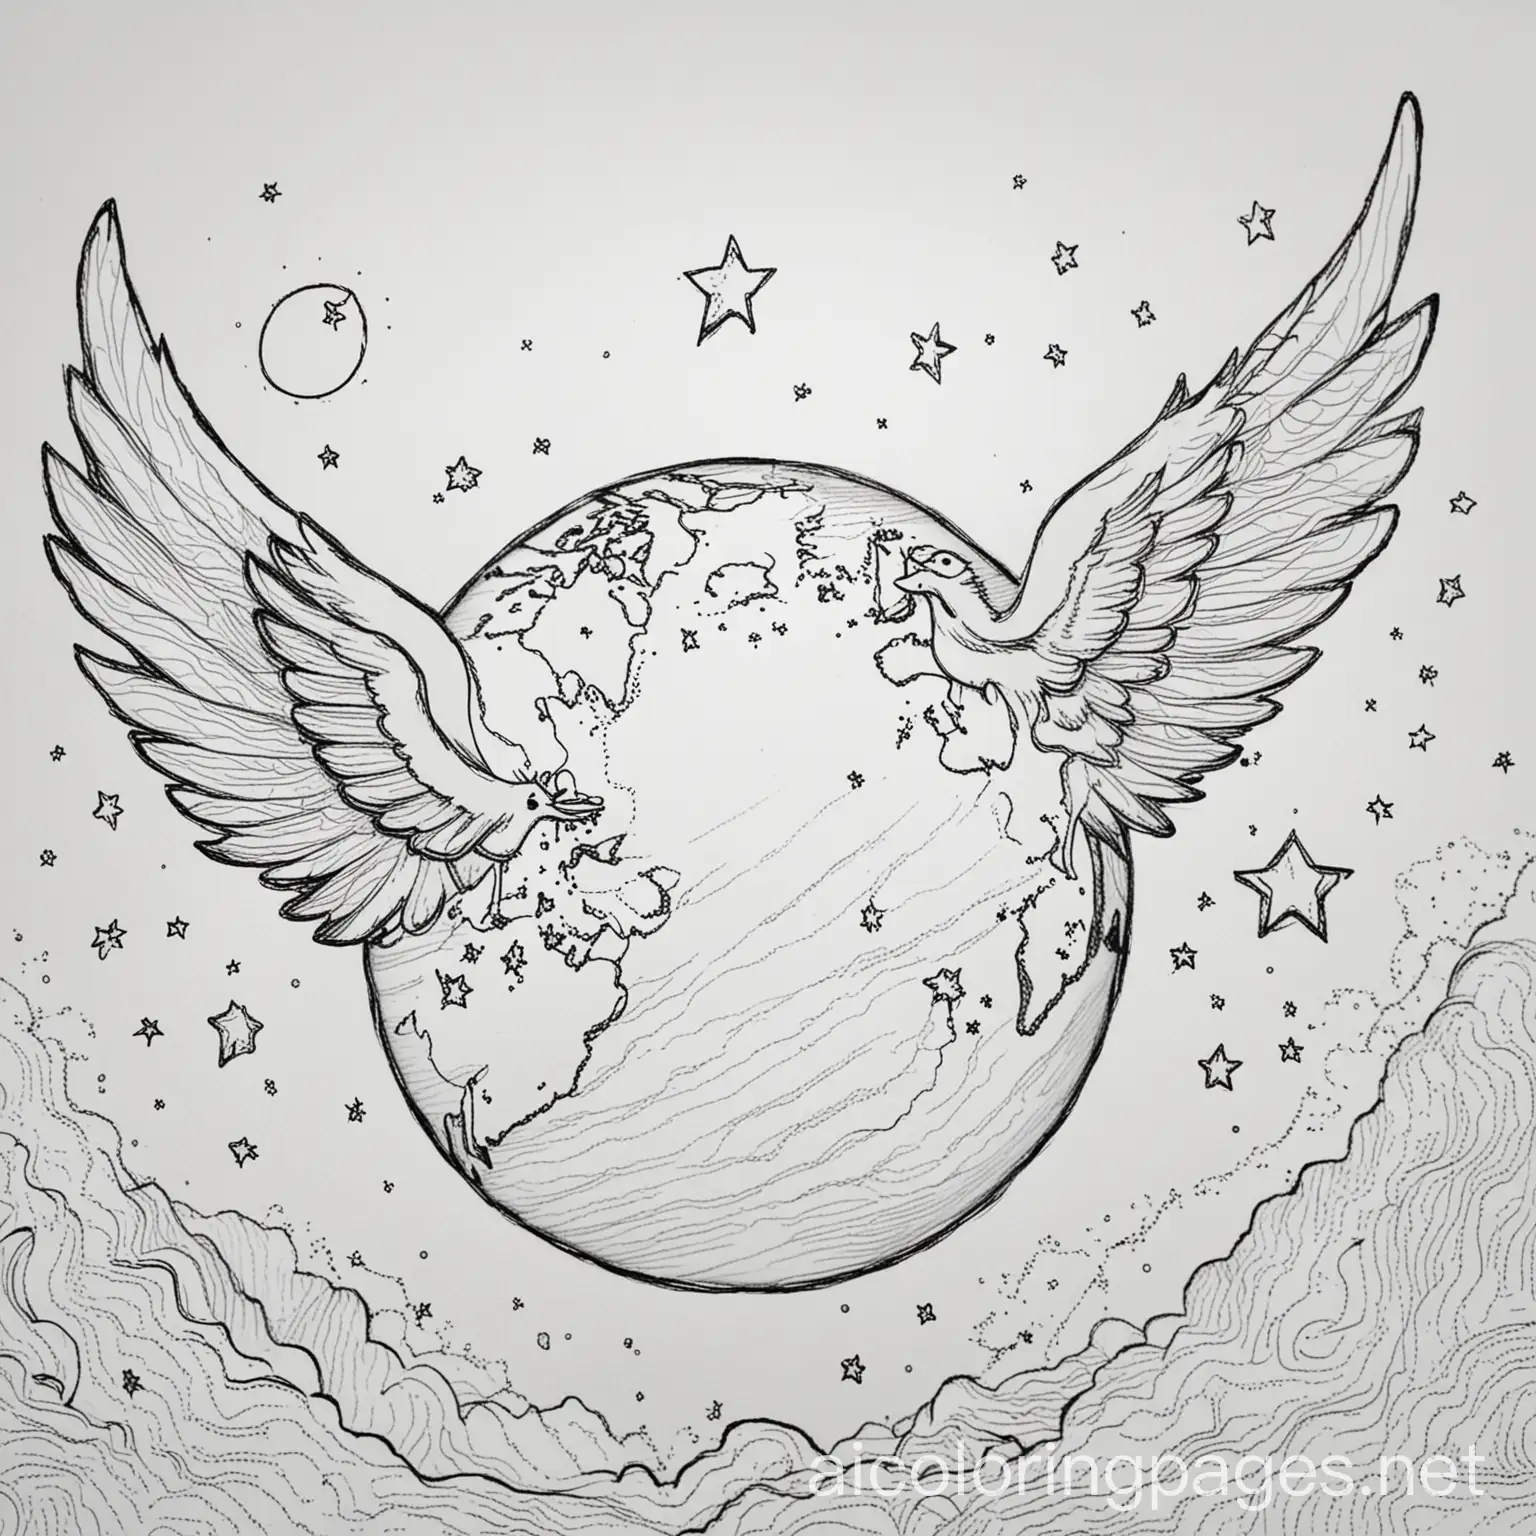 Earth with wings  stars in the distance, Coloring Page, black and white, line art, white background, Simplicity, Ample White Space. The background of the coloring page is plain white to make it easy for young children to color within the lines. The outlines of all the subjects are easy to distinguish, making it simple for kids to color without too much difficulty